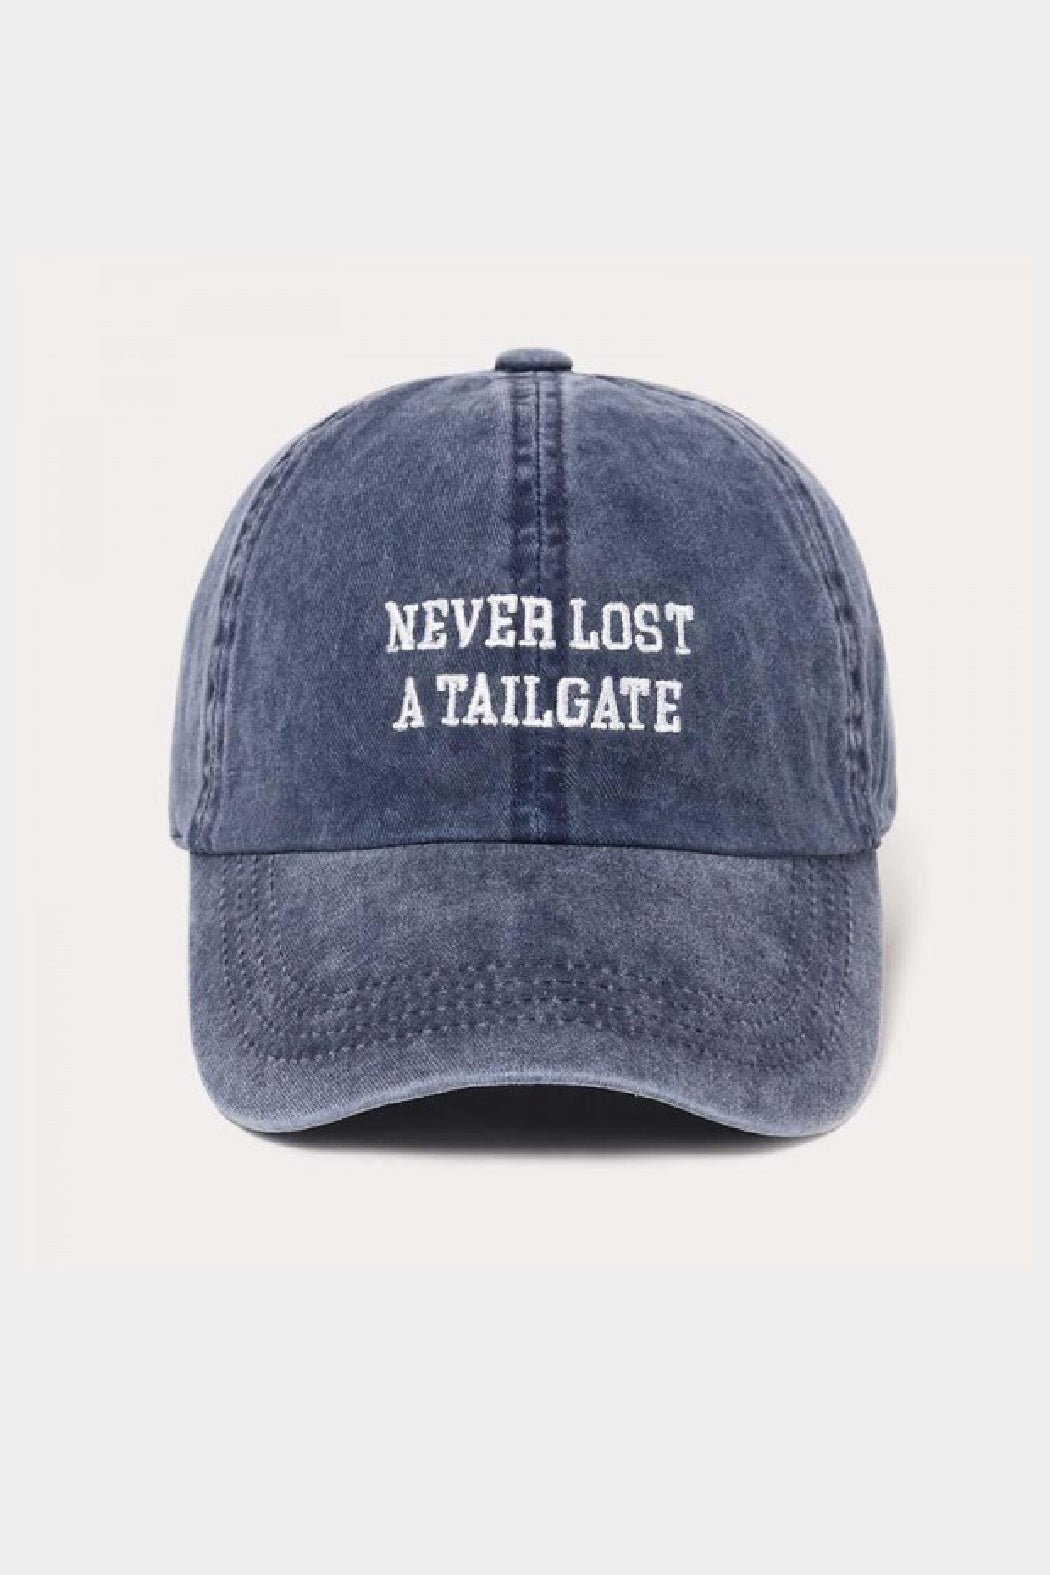 Never Lost A Tailgate Baseball Cap